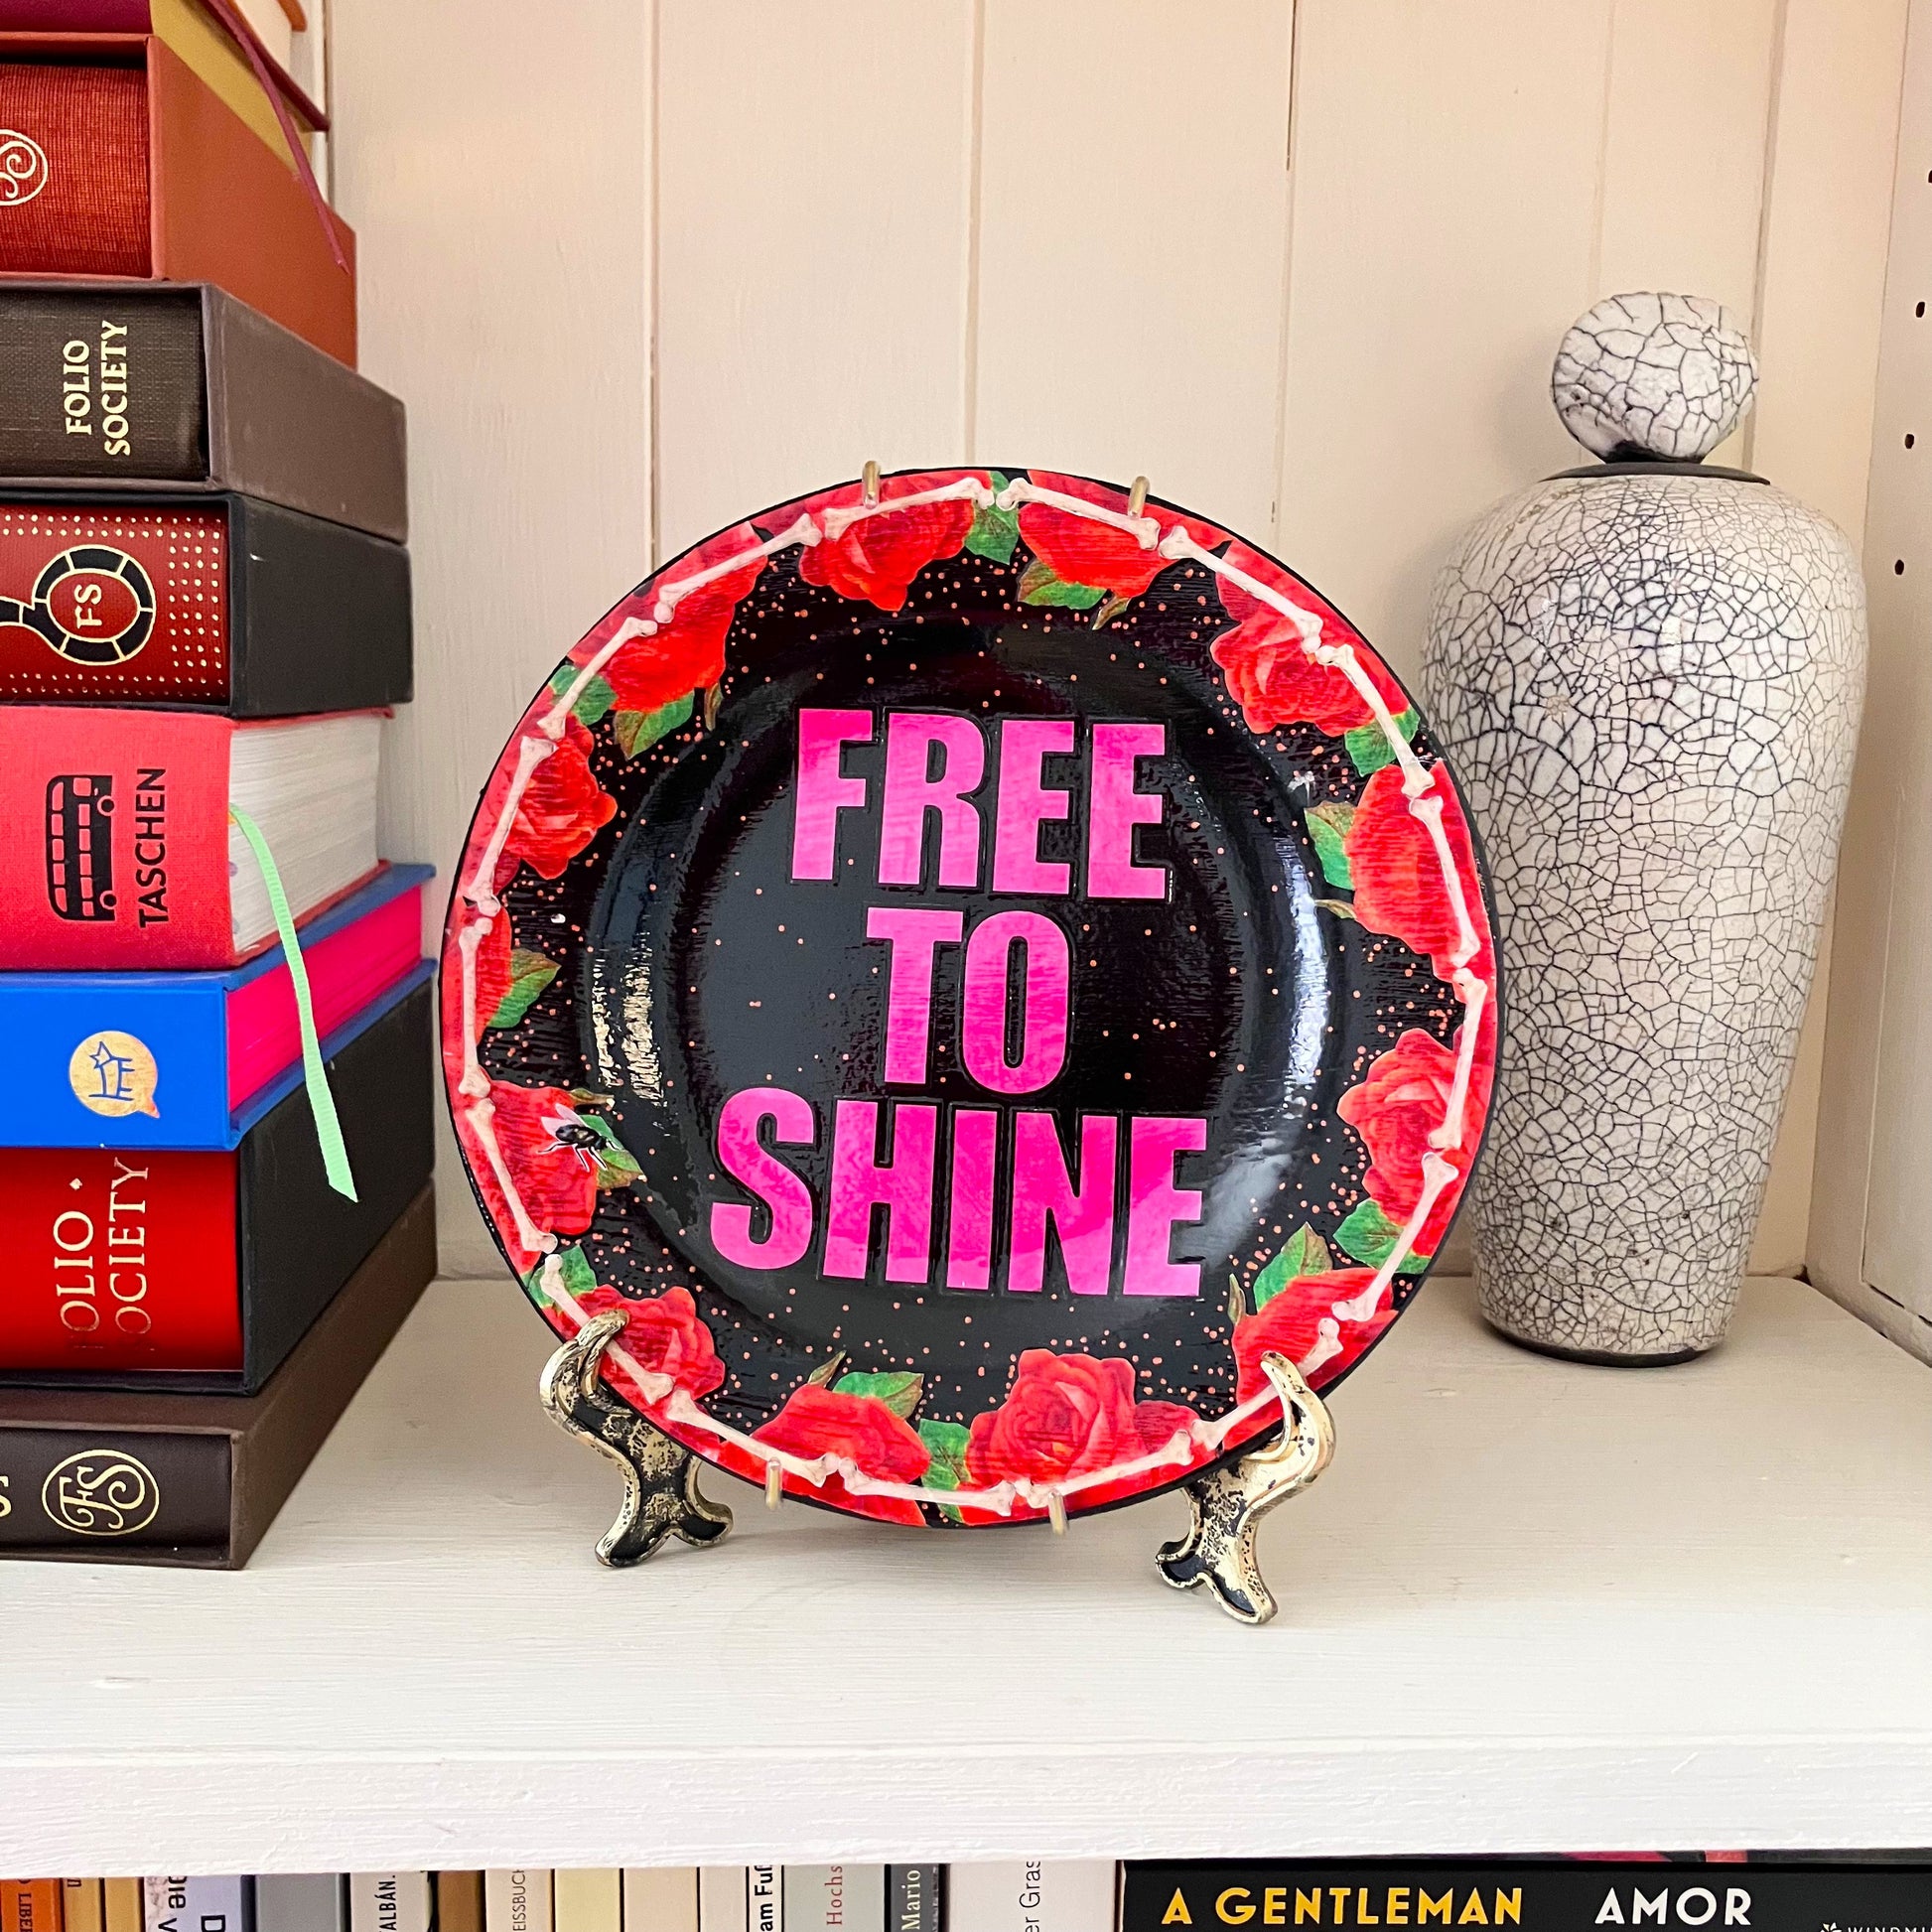 "Free To Shine" Upcycled Wall Plate by House of Frisson, featuring a unique collage of red roses and bones on a black background. Wall plate on a stand resting on a shelf.